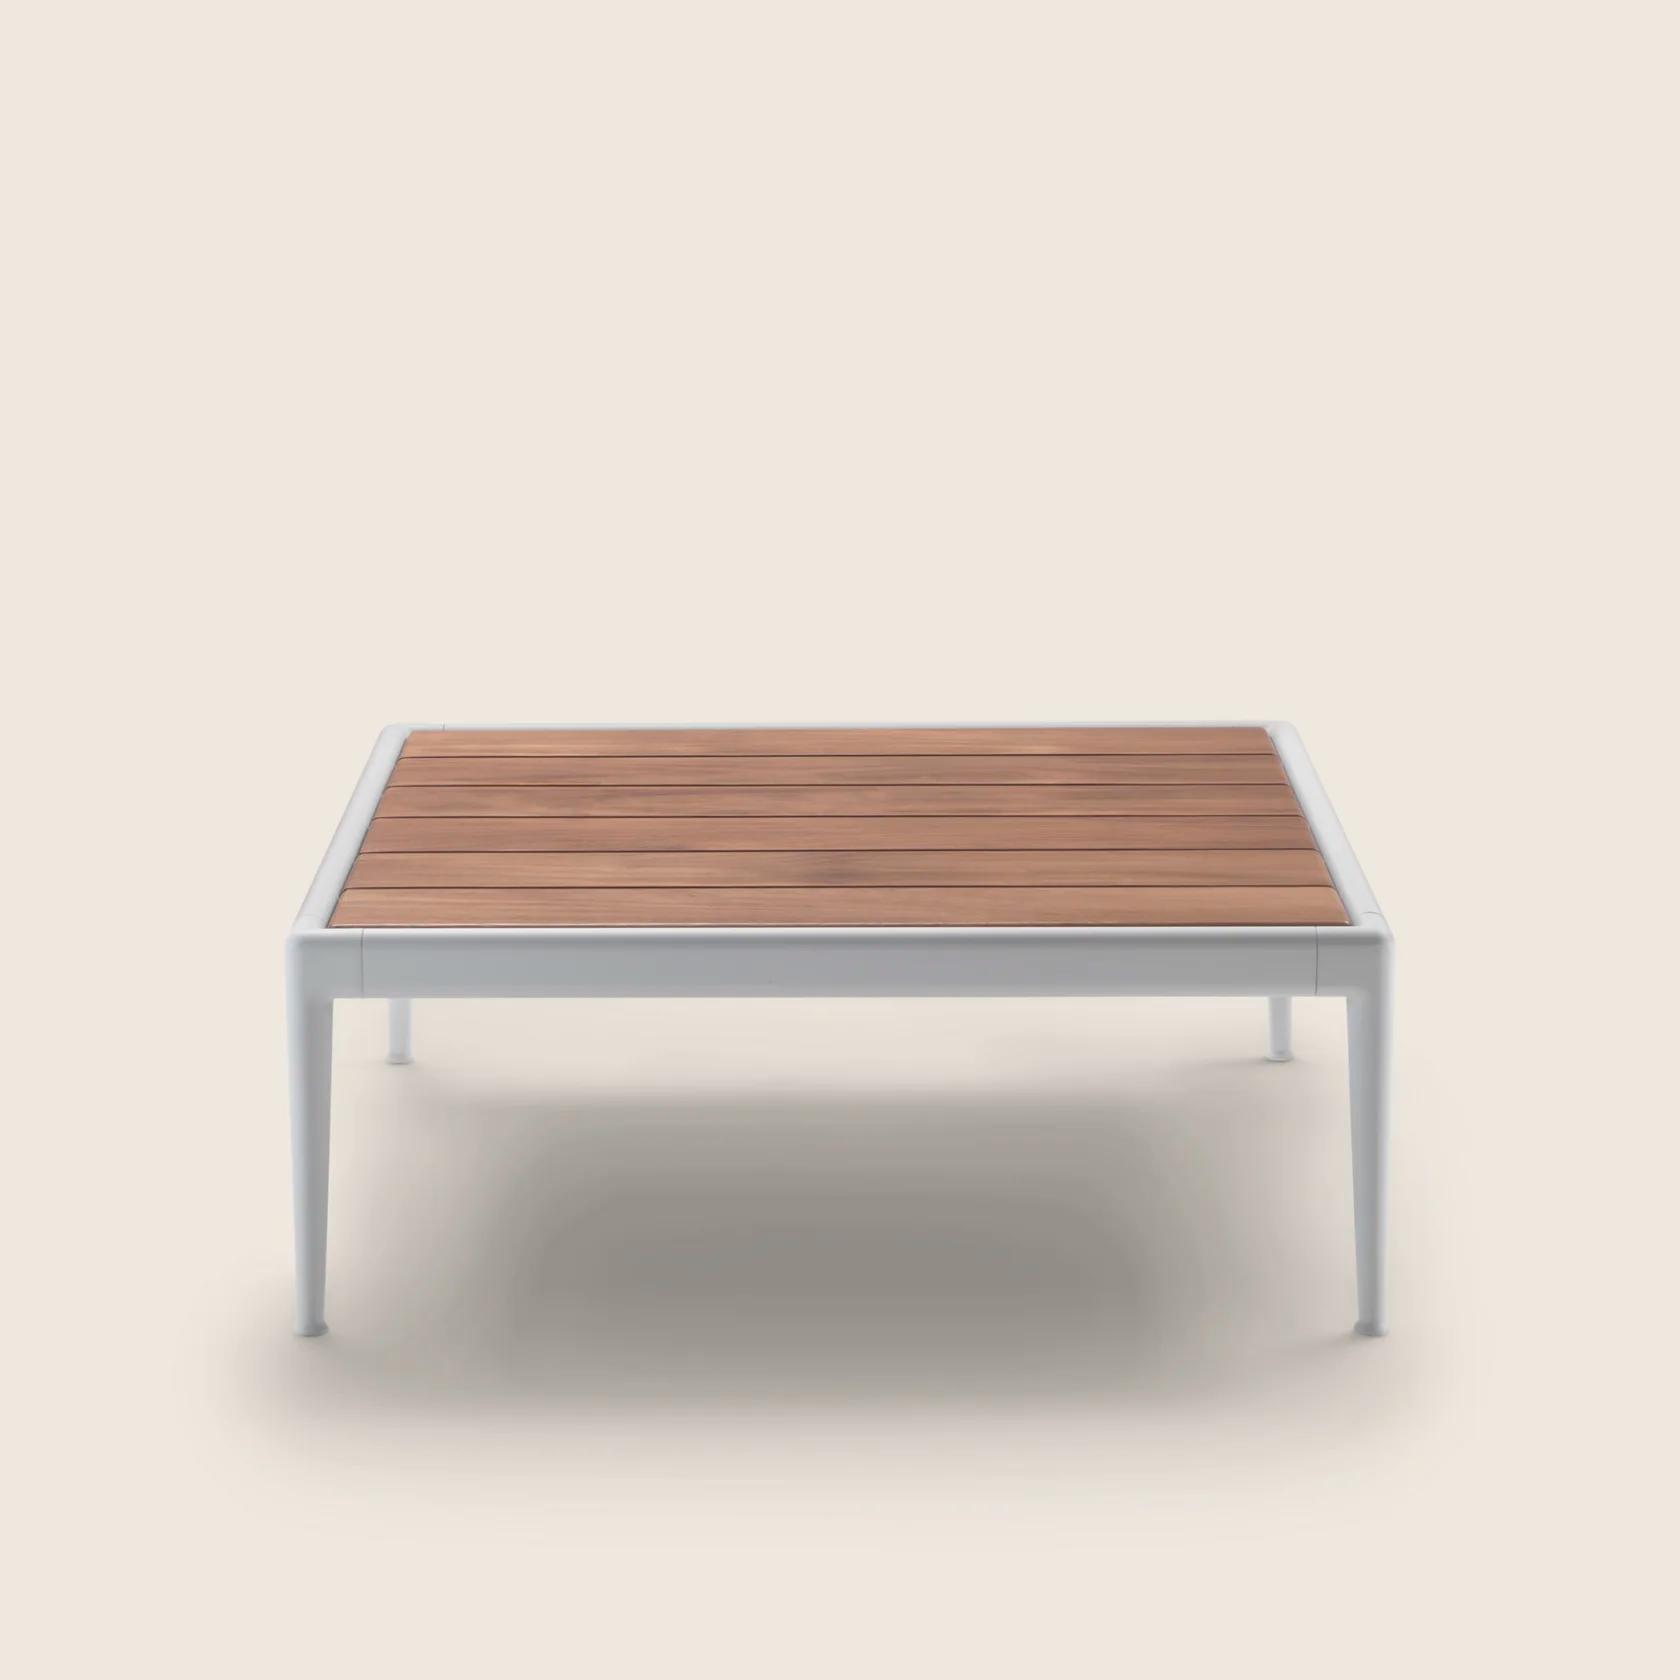 0283H1_PICO OUTDOOR_COFFEETABLE_08.png